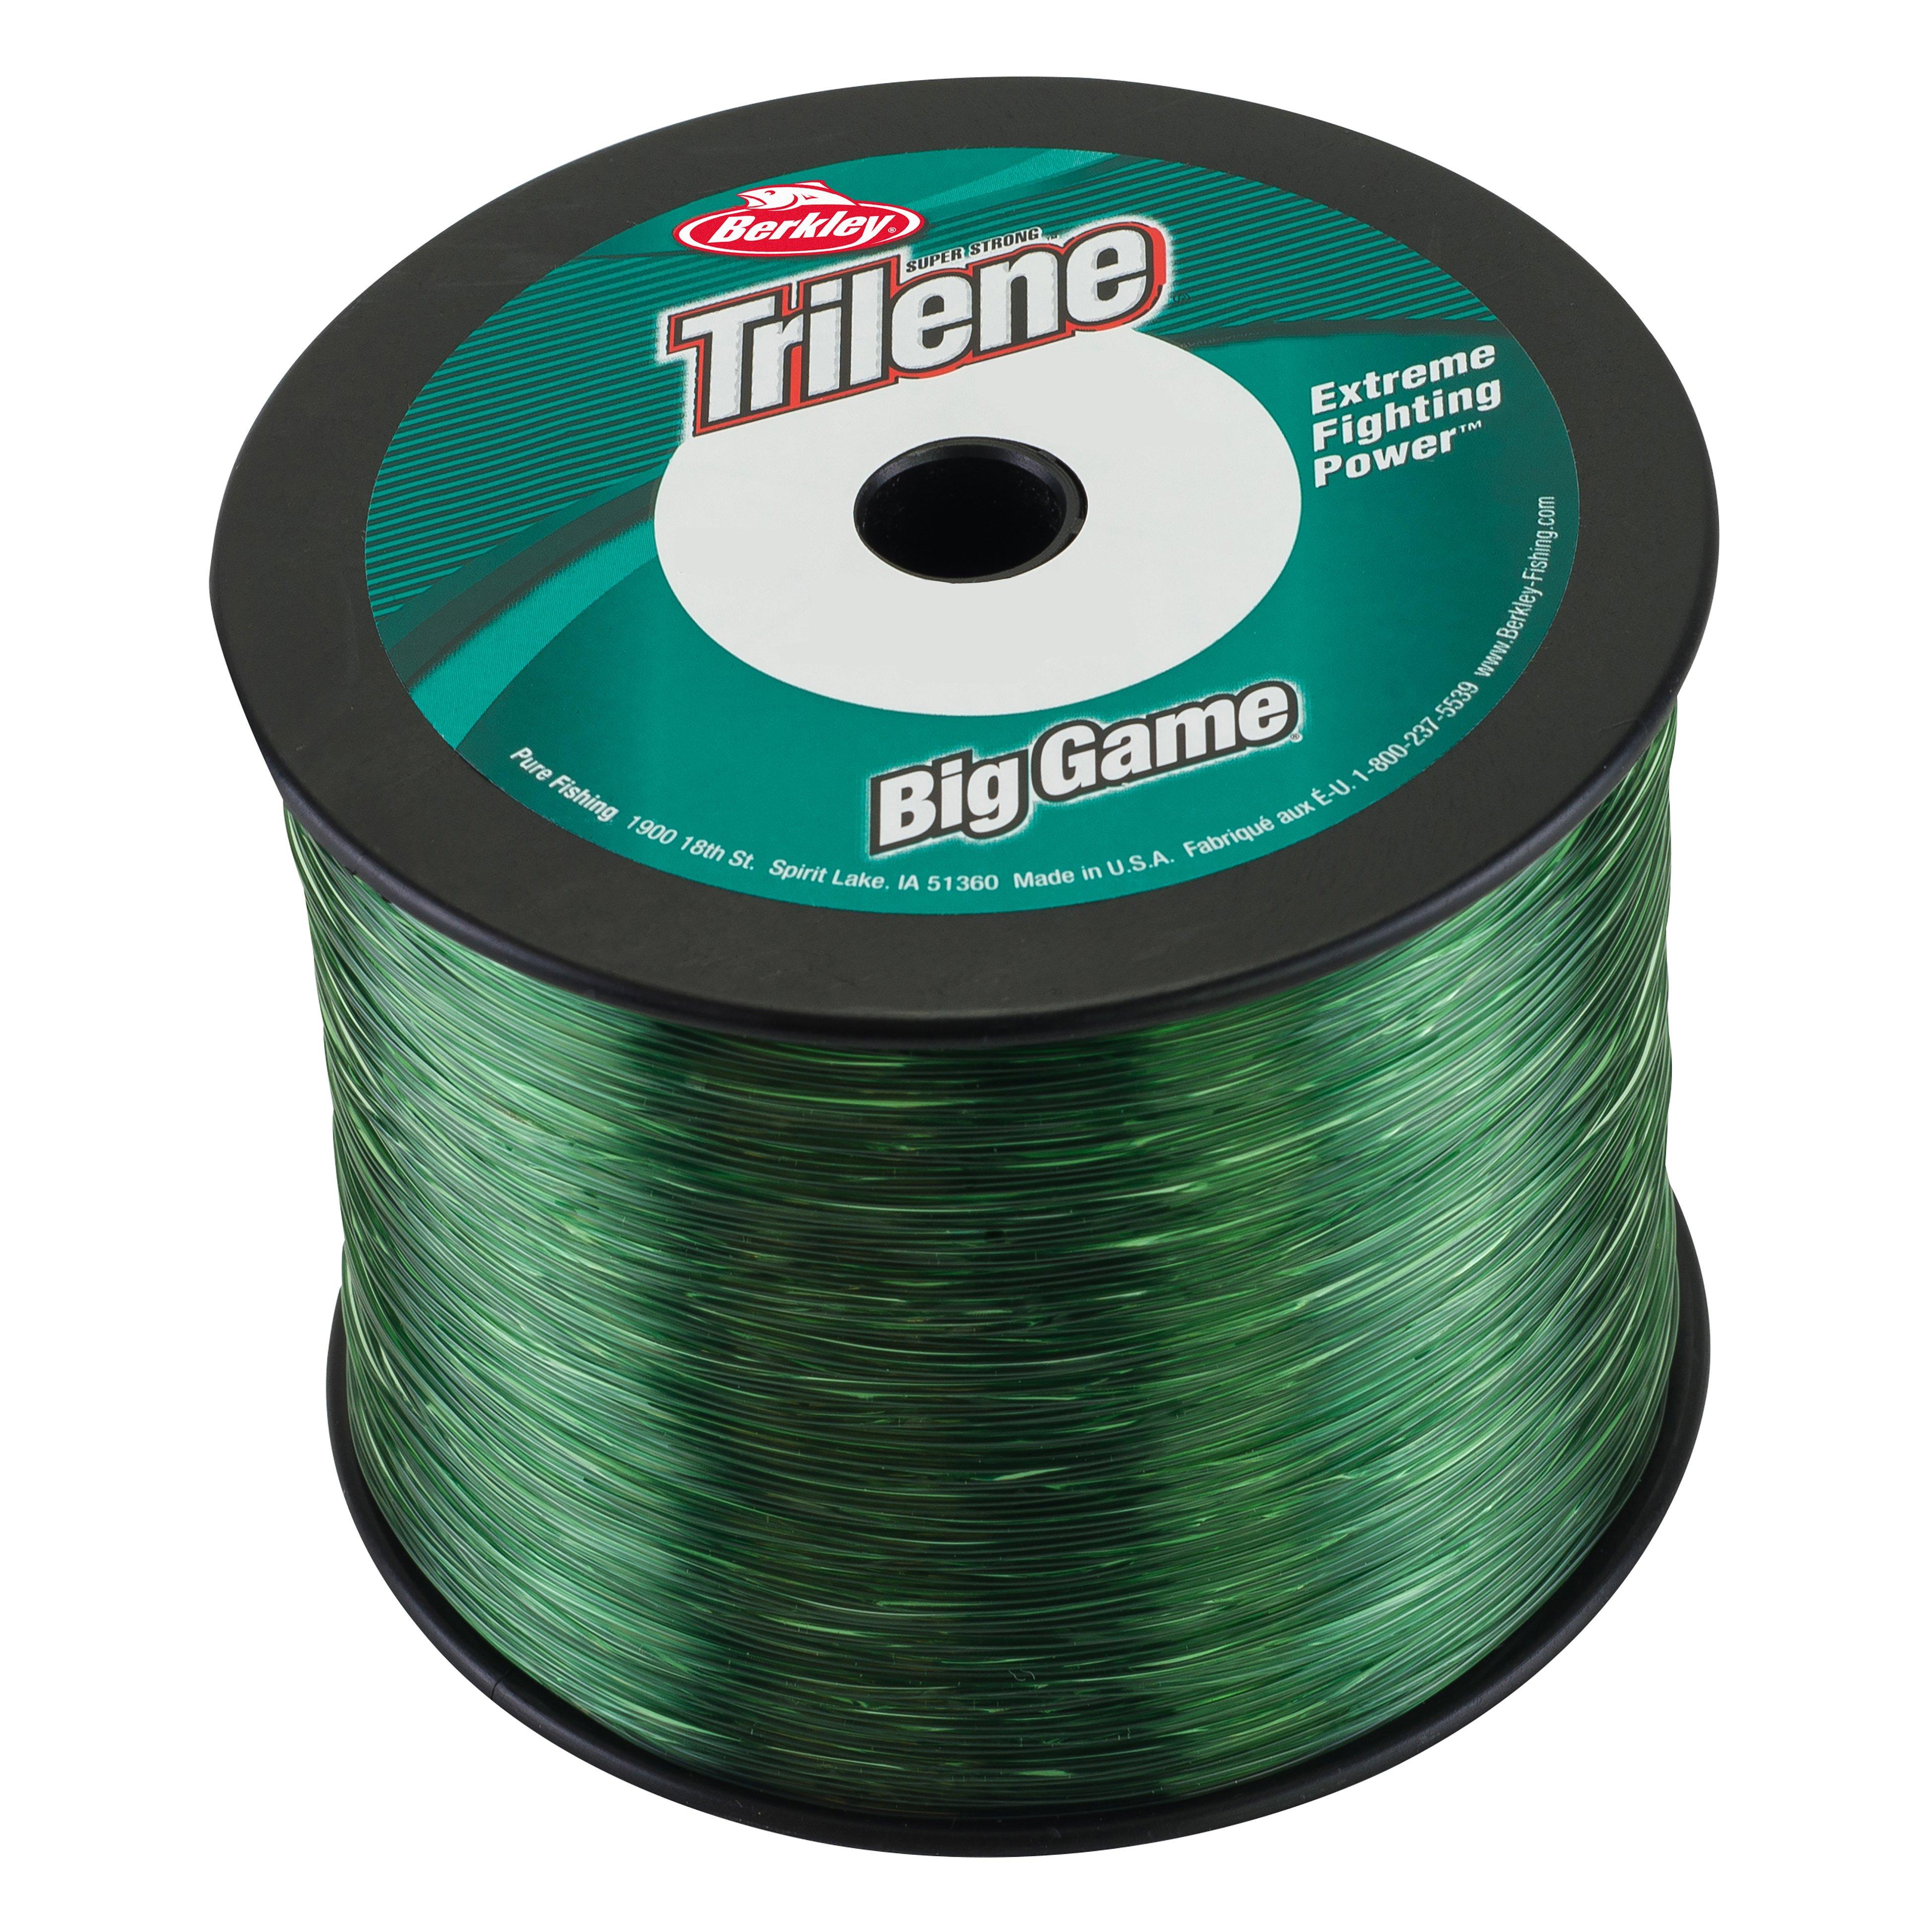 Berkley Trilene® Big Game, Clear, 50lb, 22.6kg, 275yd, 251m Monofilament  Fishing Line, Suitable for Saltwater and Freshwater Environments